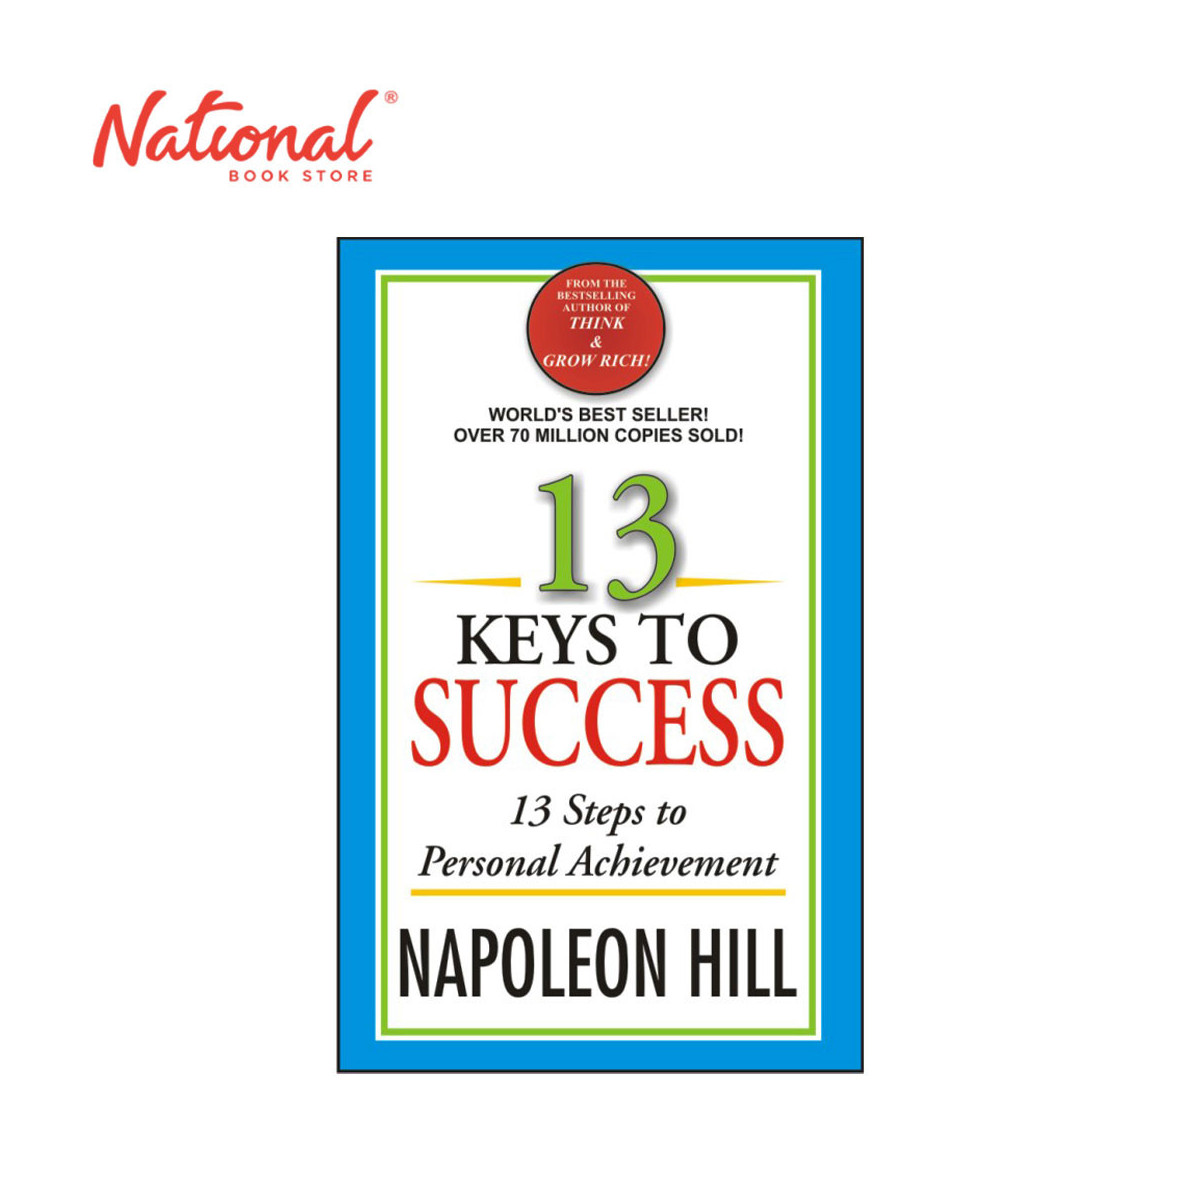 13 Keys To Success by Napoleon Hill - Trade Paperback - Self-Help Books